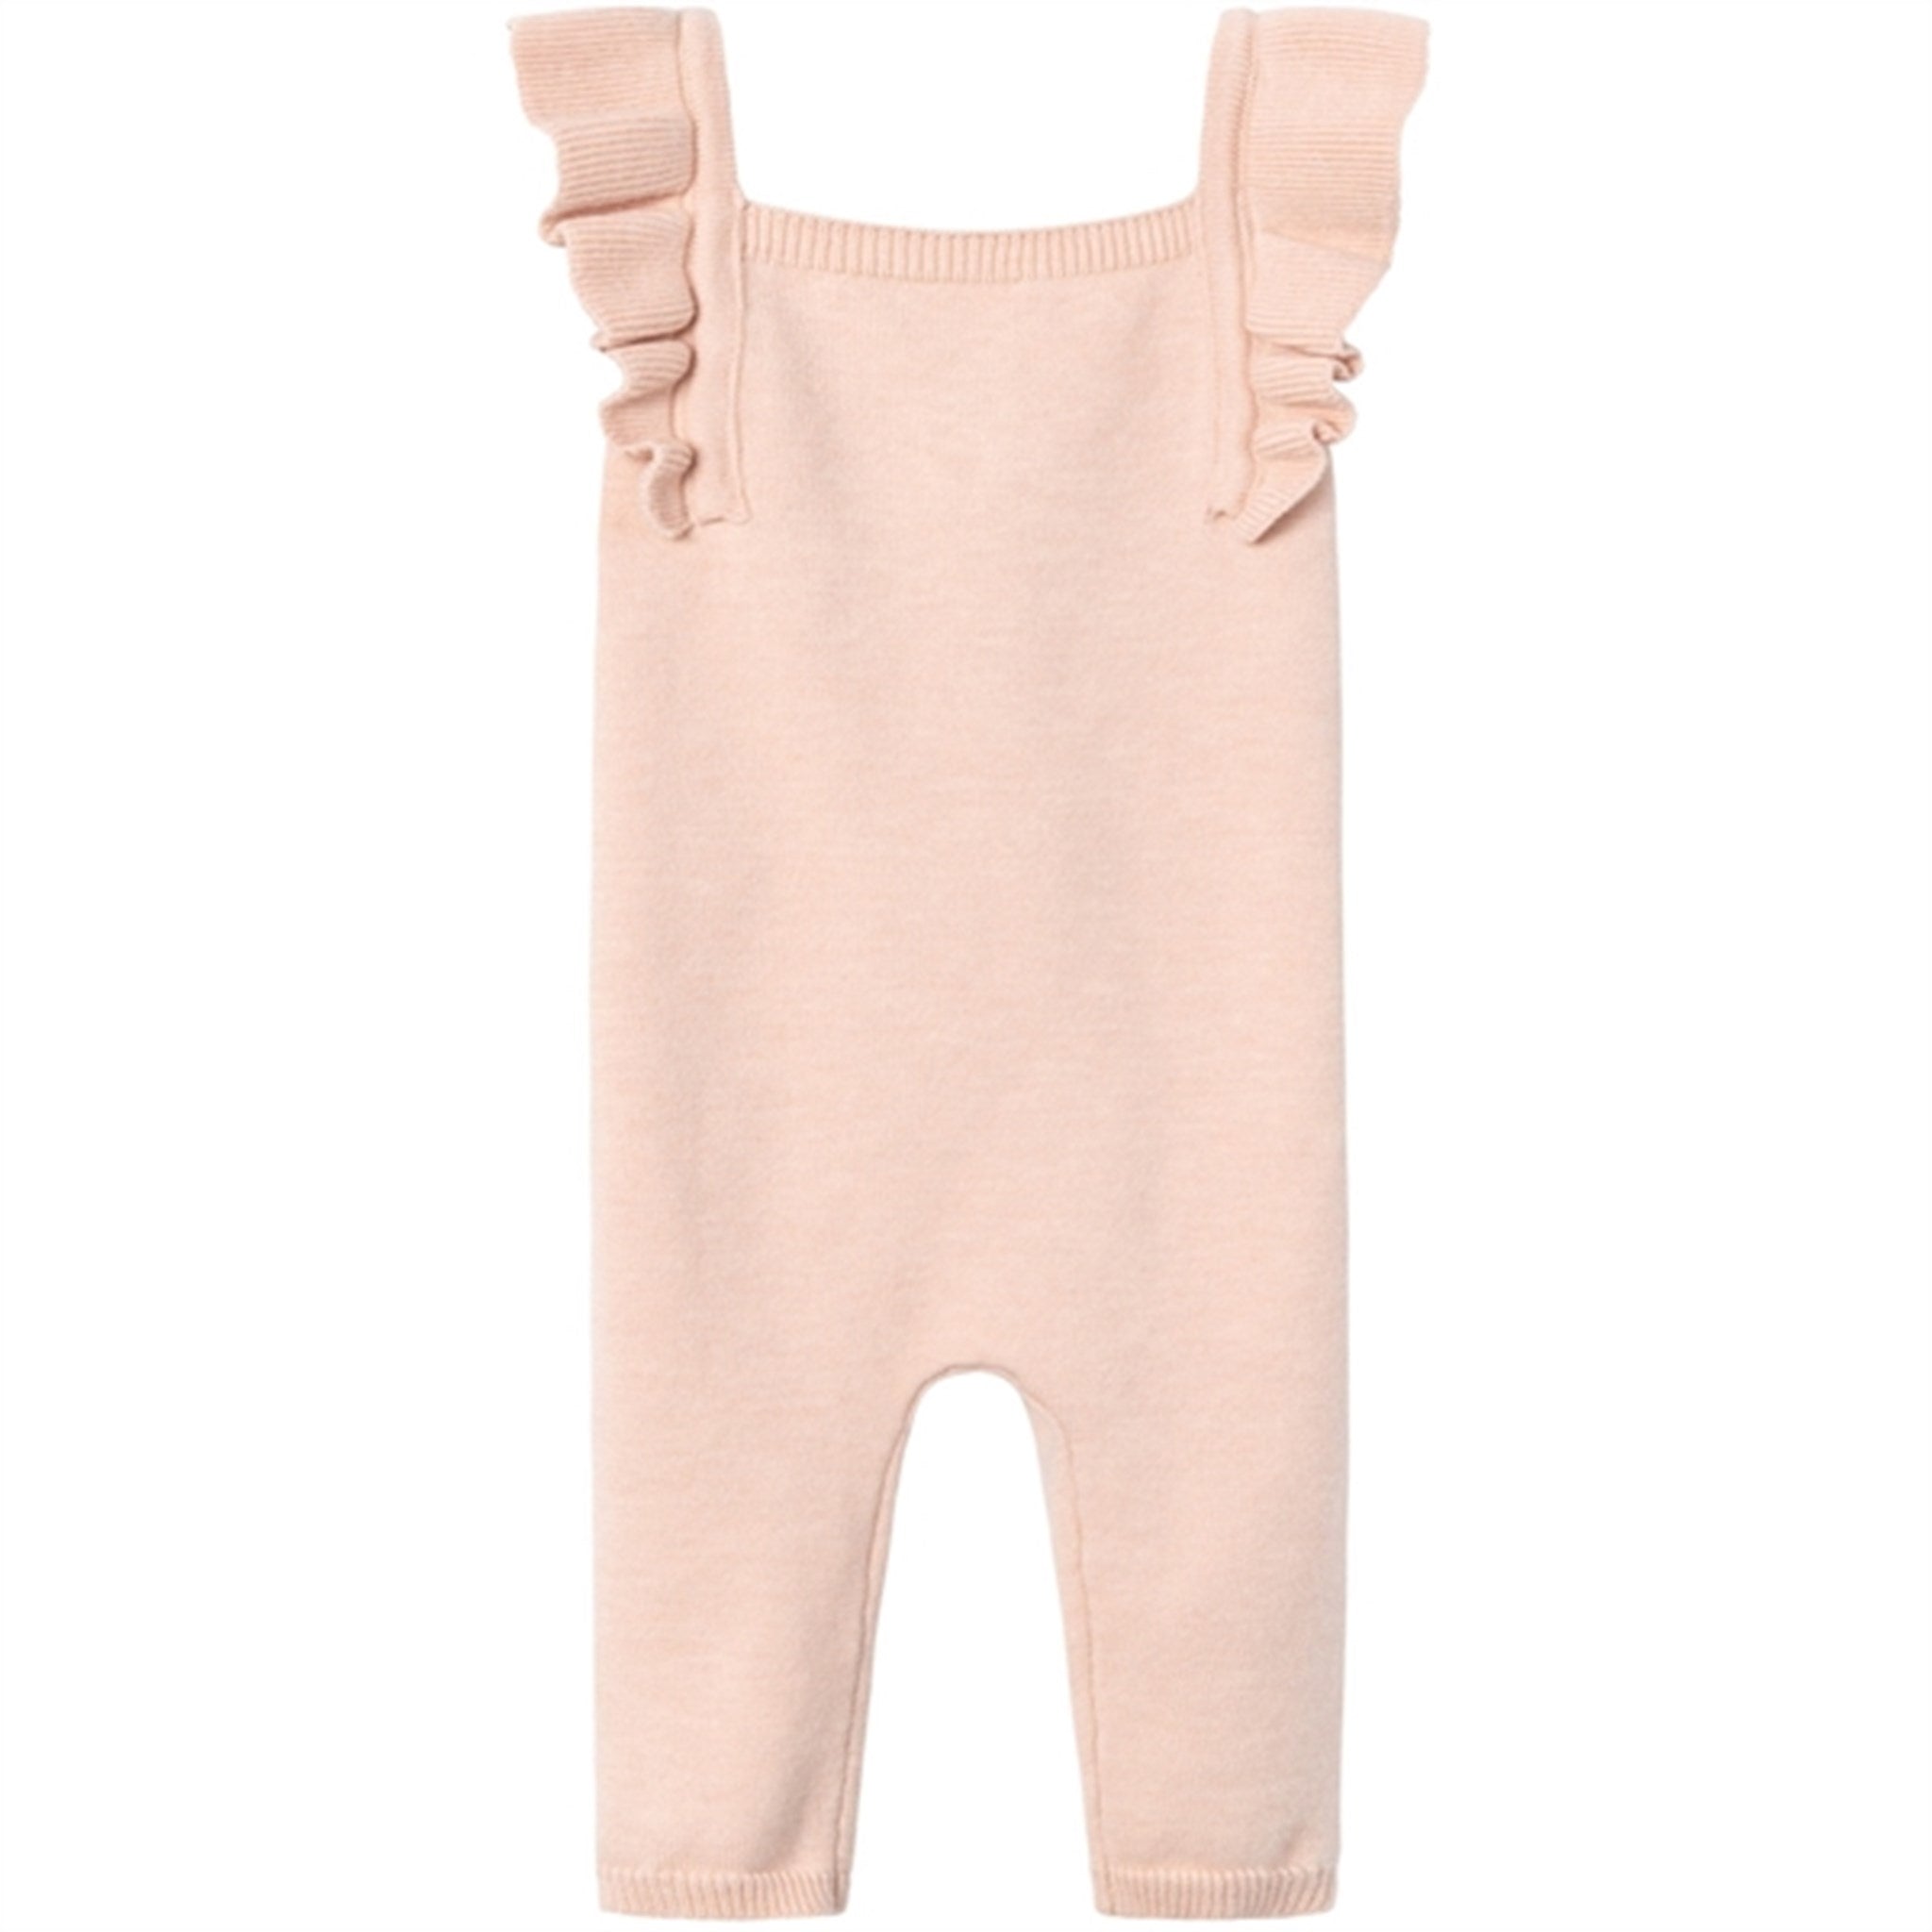 Name it Rose Smoke Remille Knit Overall